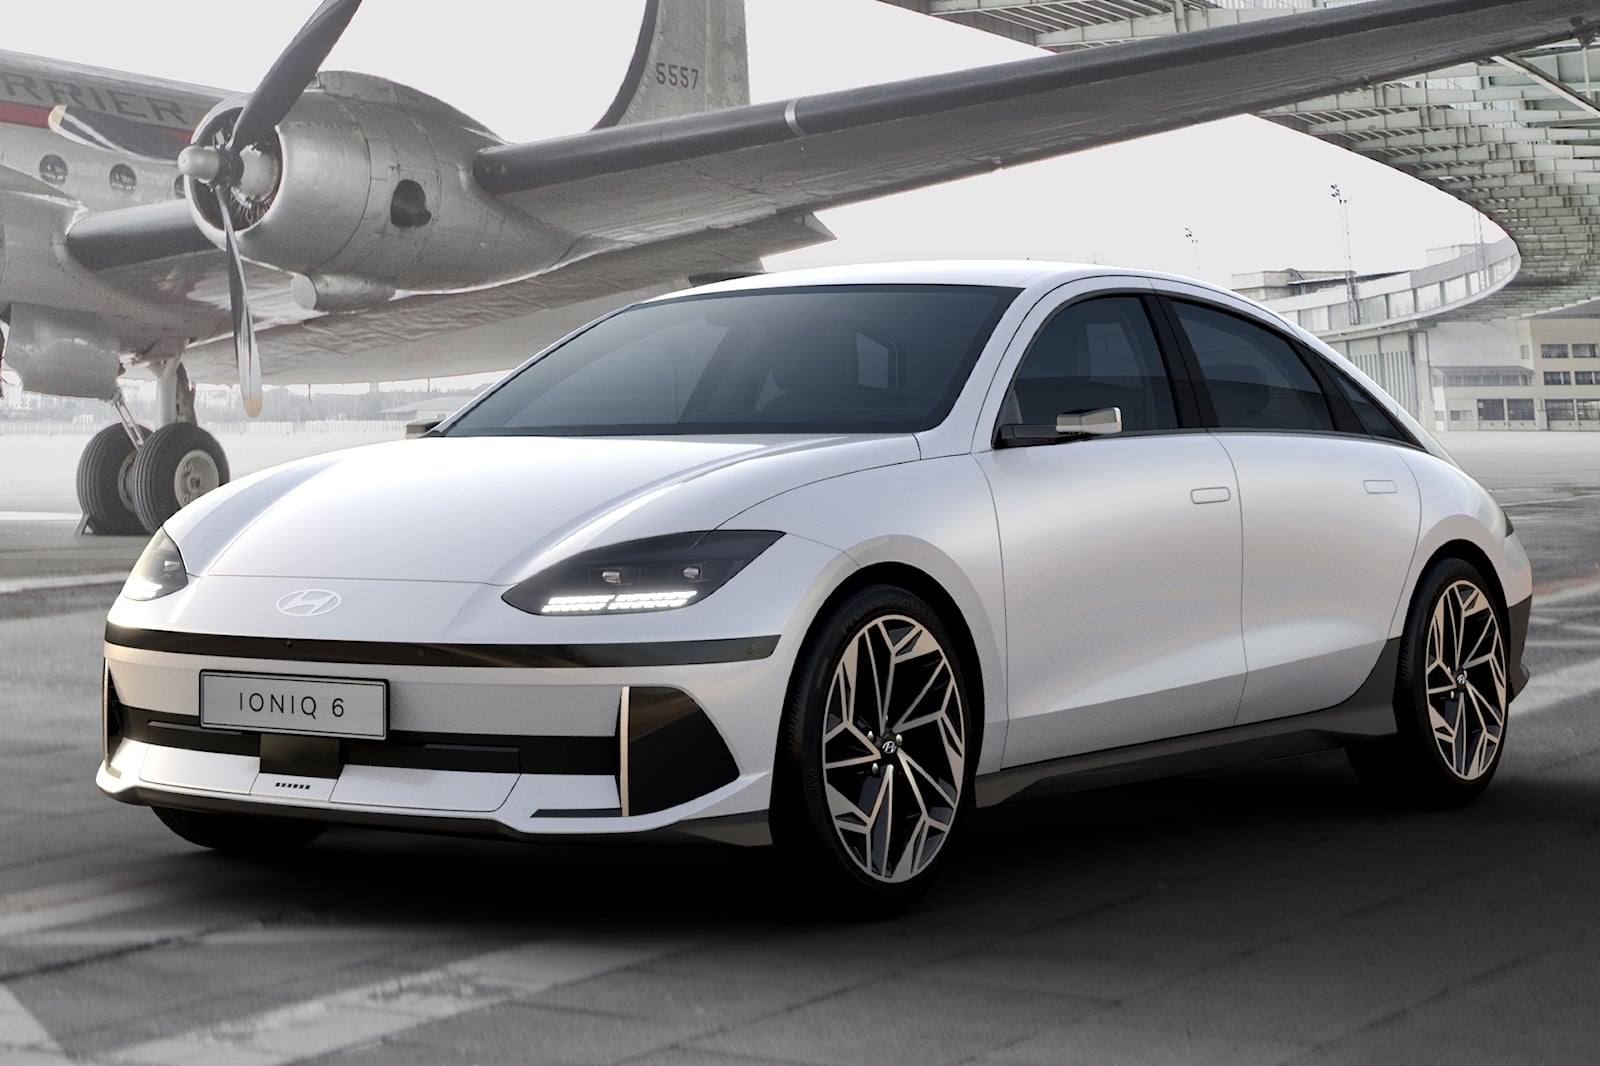 hyundai-ioniq-6-can-cover-nearly-400-miles-on-a-single-charge